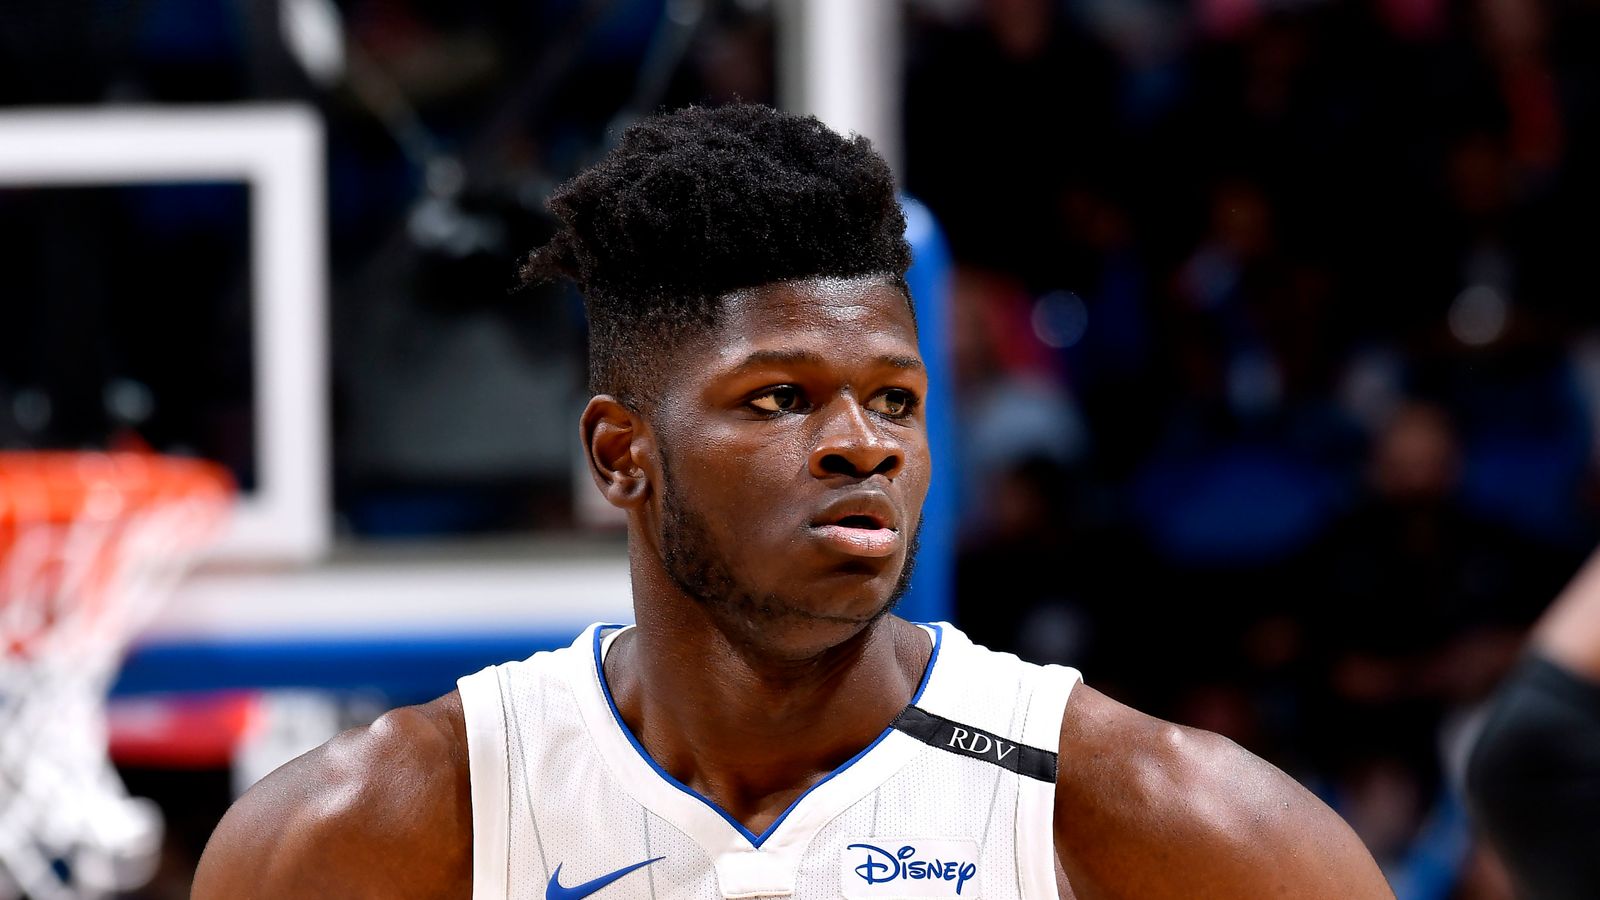 Orlando Magic's Mohamed Bamba out with stress fracture | NBA News | Sky Sports